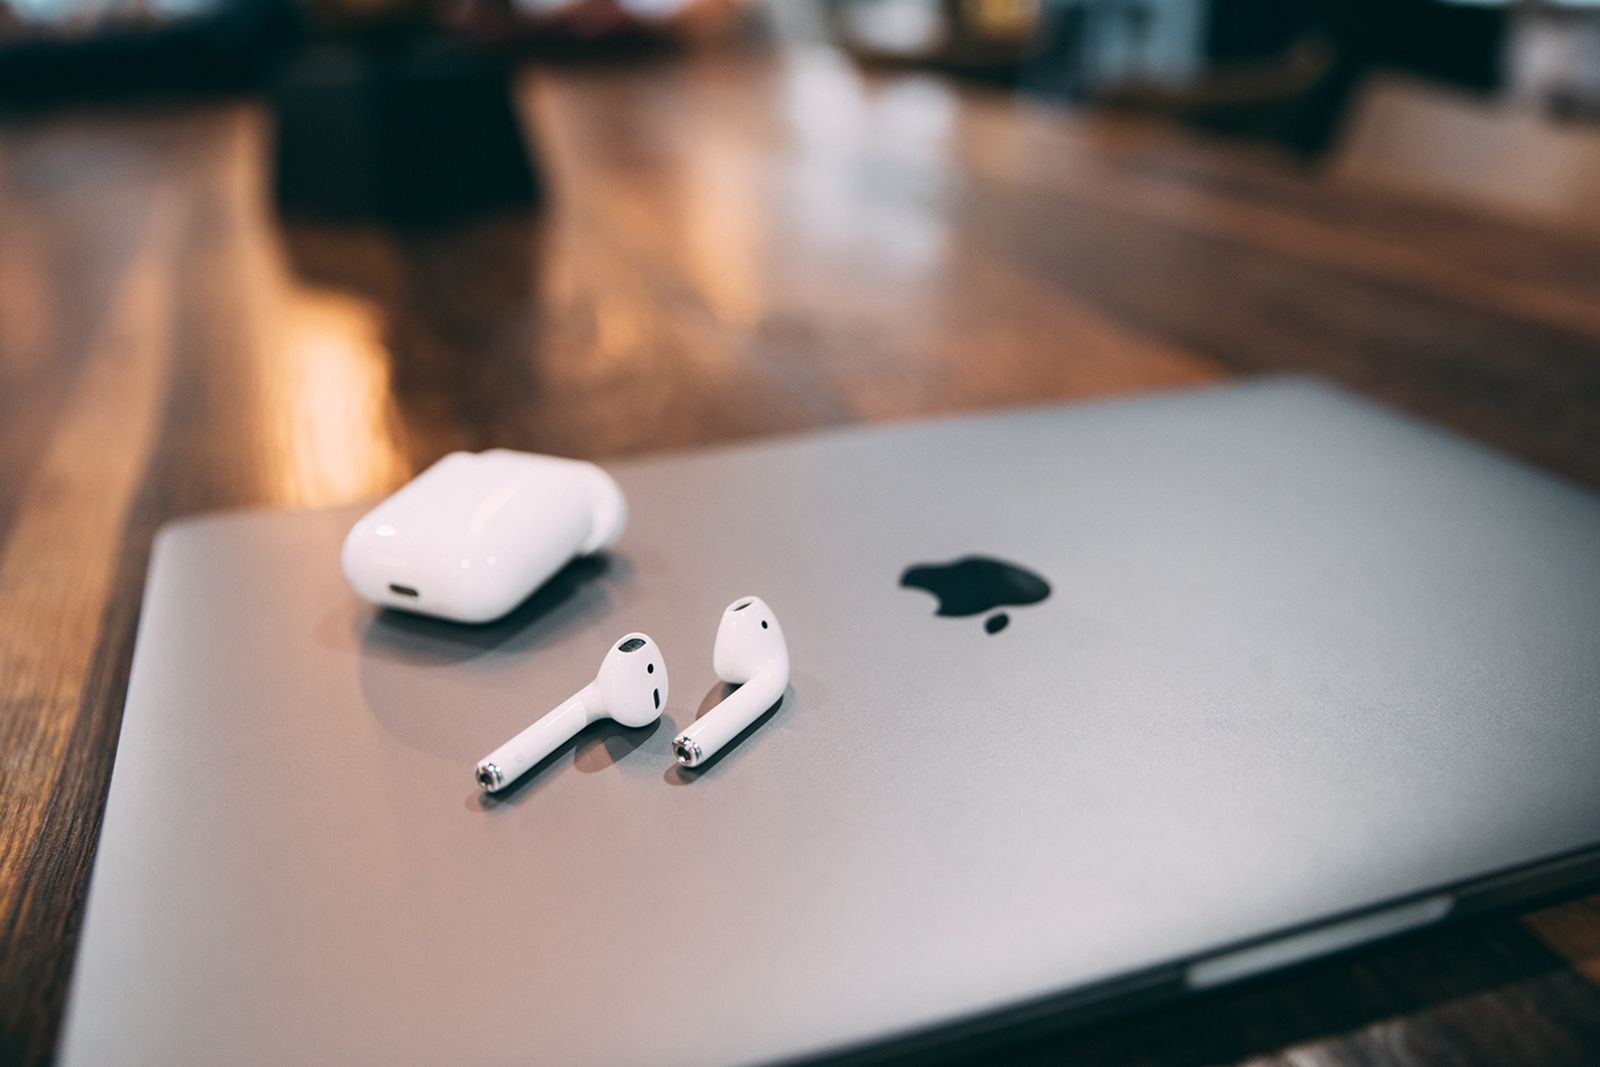 AirPods on Mac